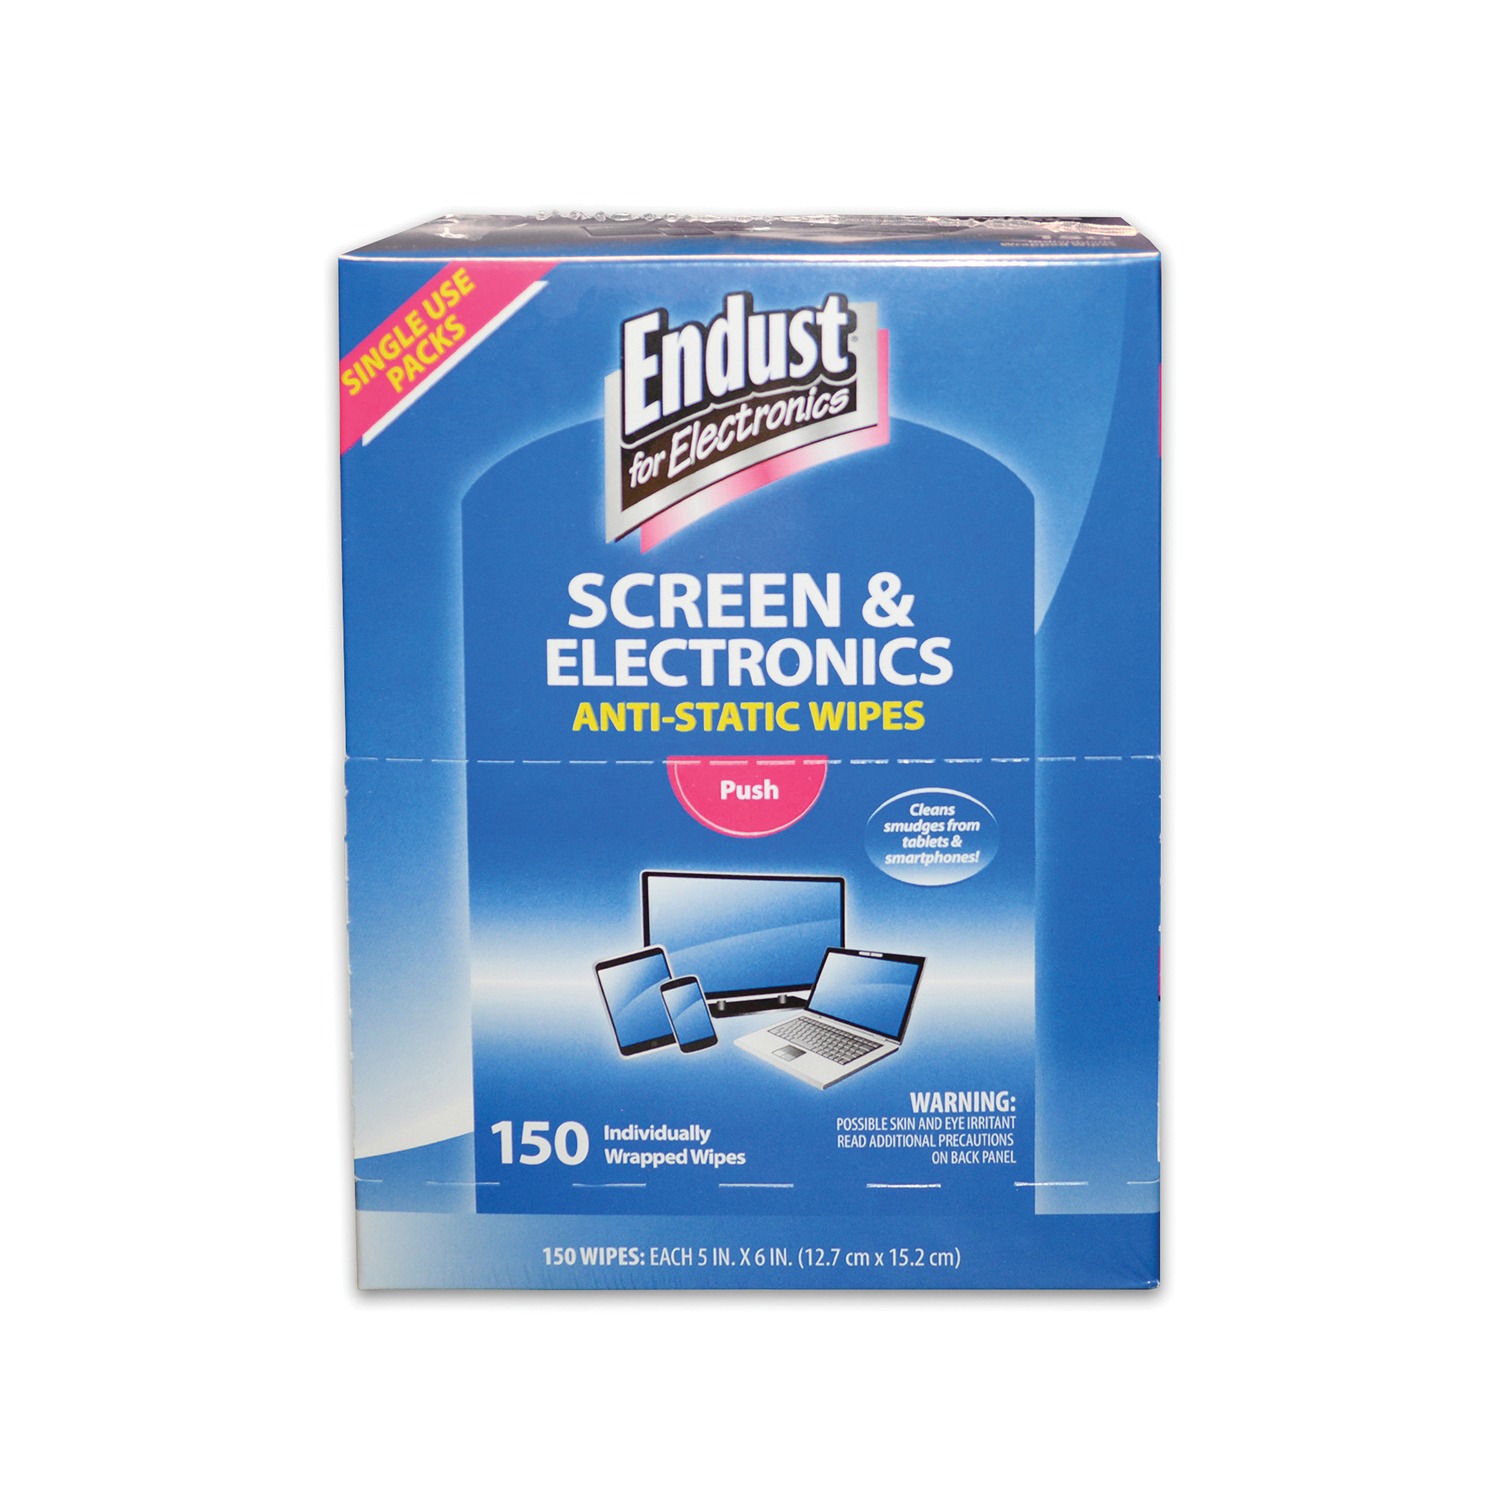 ''Endust for ELECTRONICS Screen and ELECTRONICS Anti-Static Wipes, 150 Count''